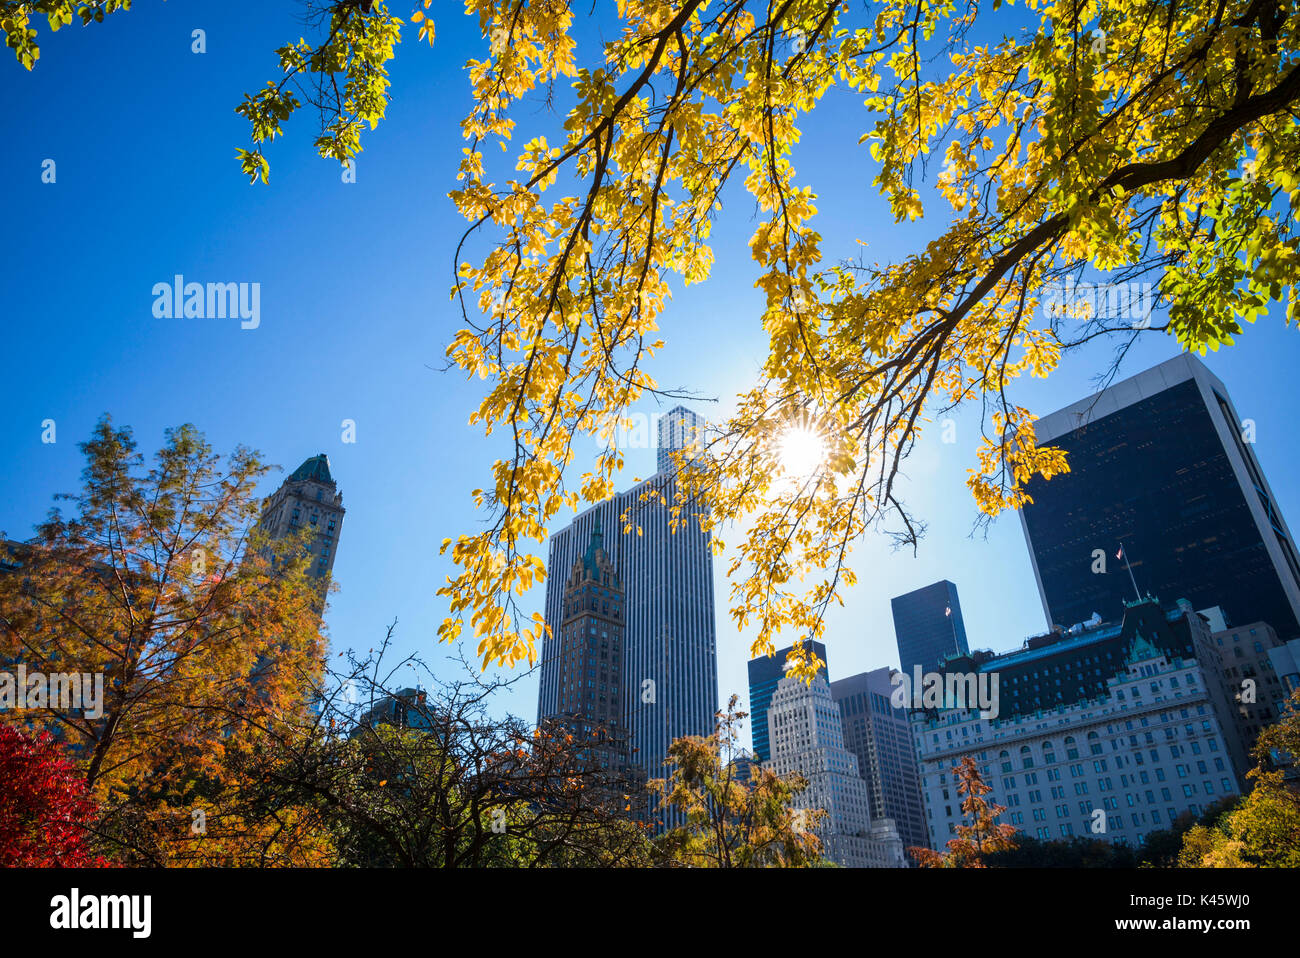 USA, New York, New York City, Central Park, Fifth Avenue buildings from Central Park, autumn Stock Photo